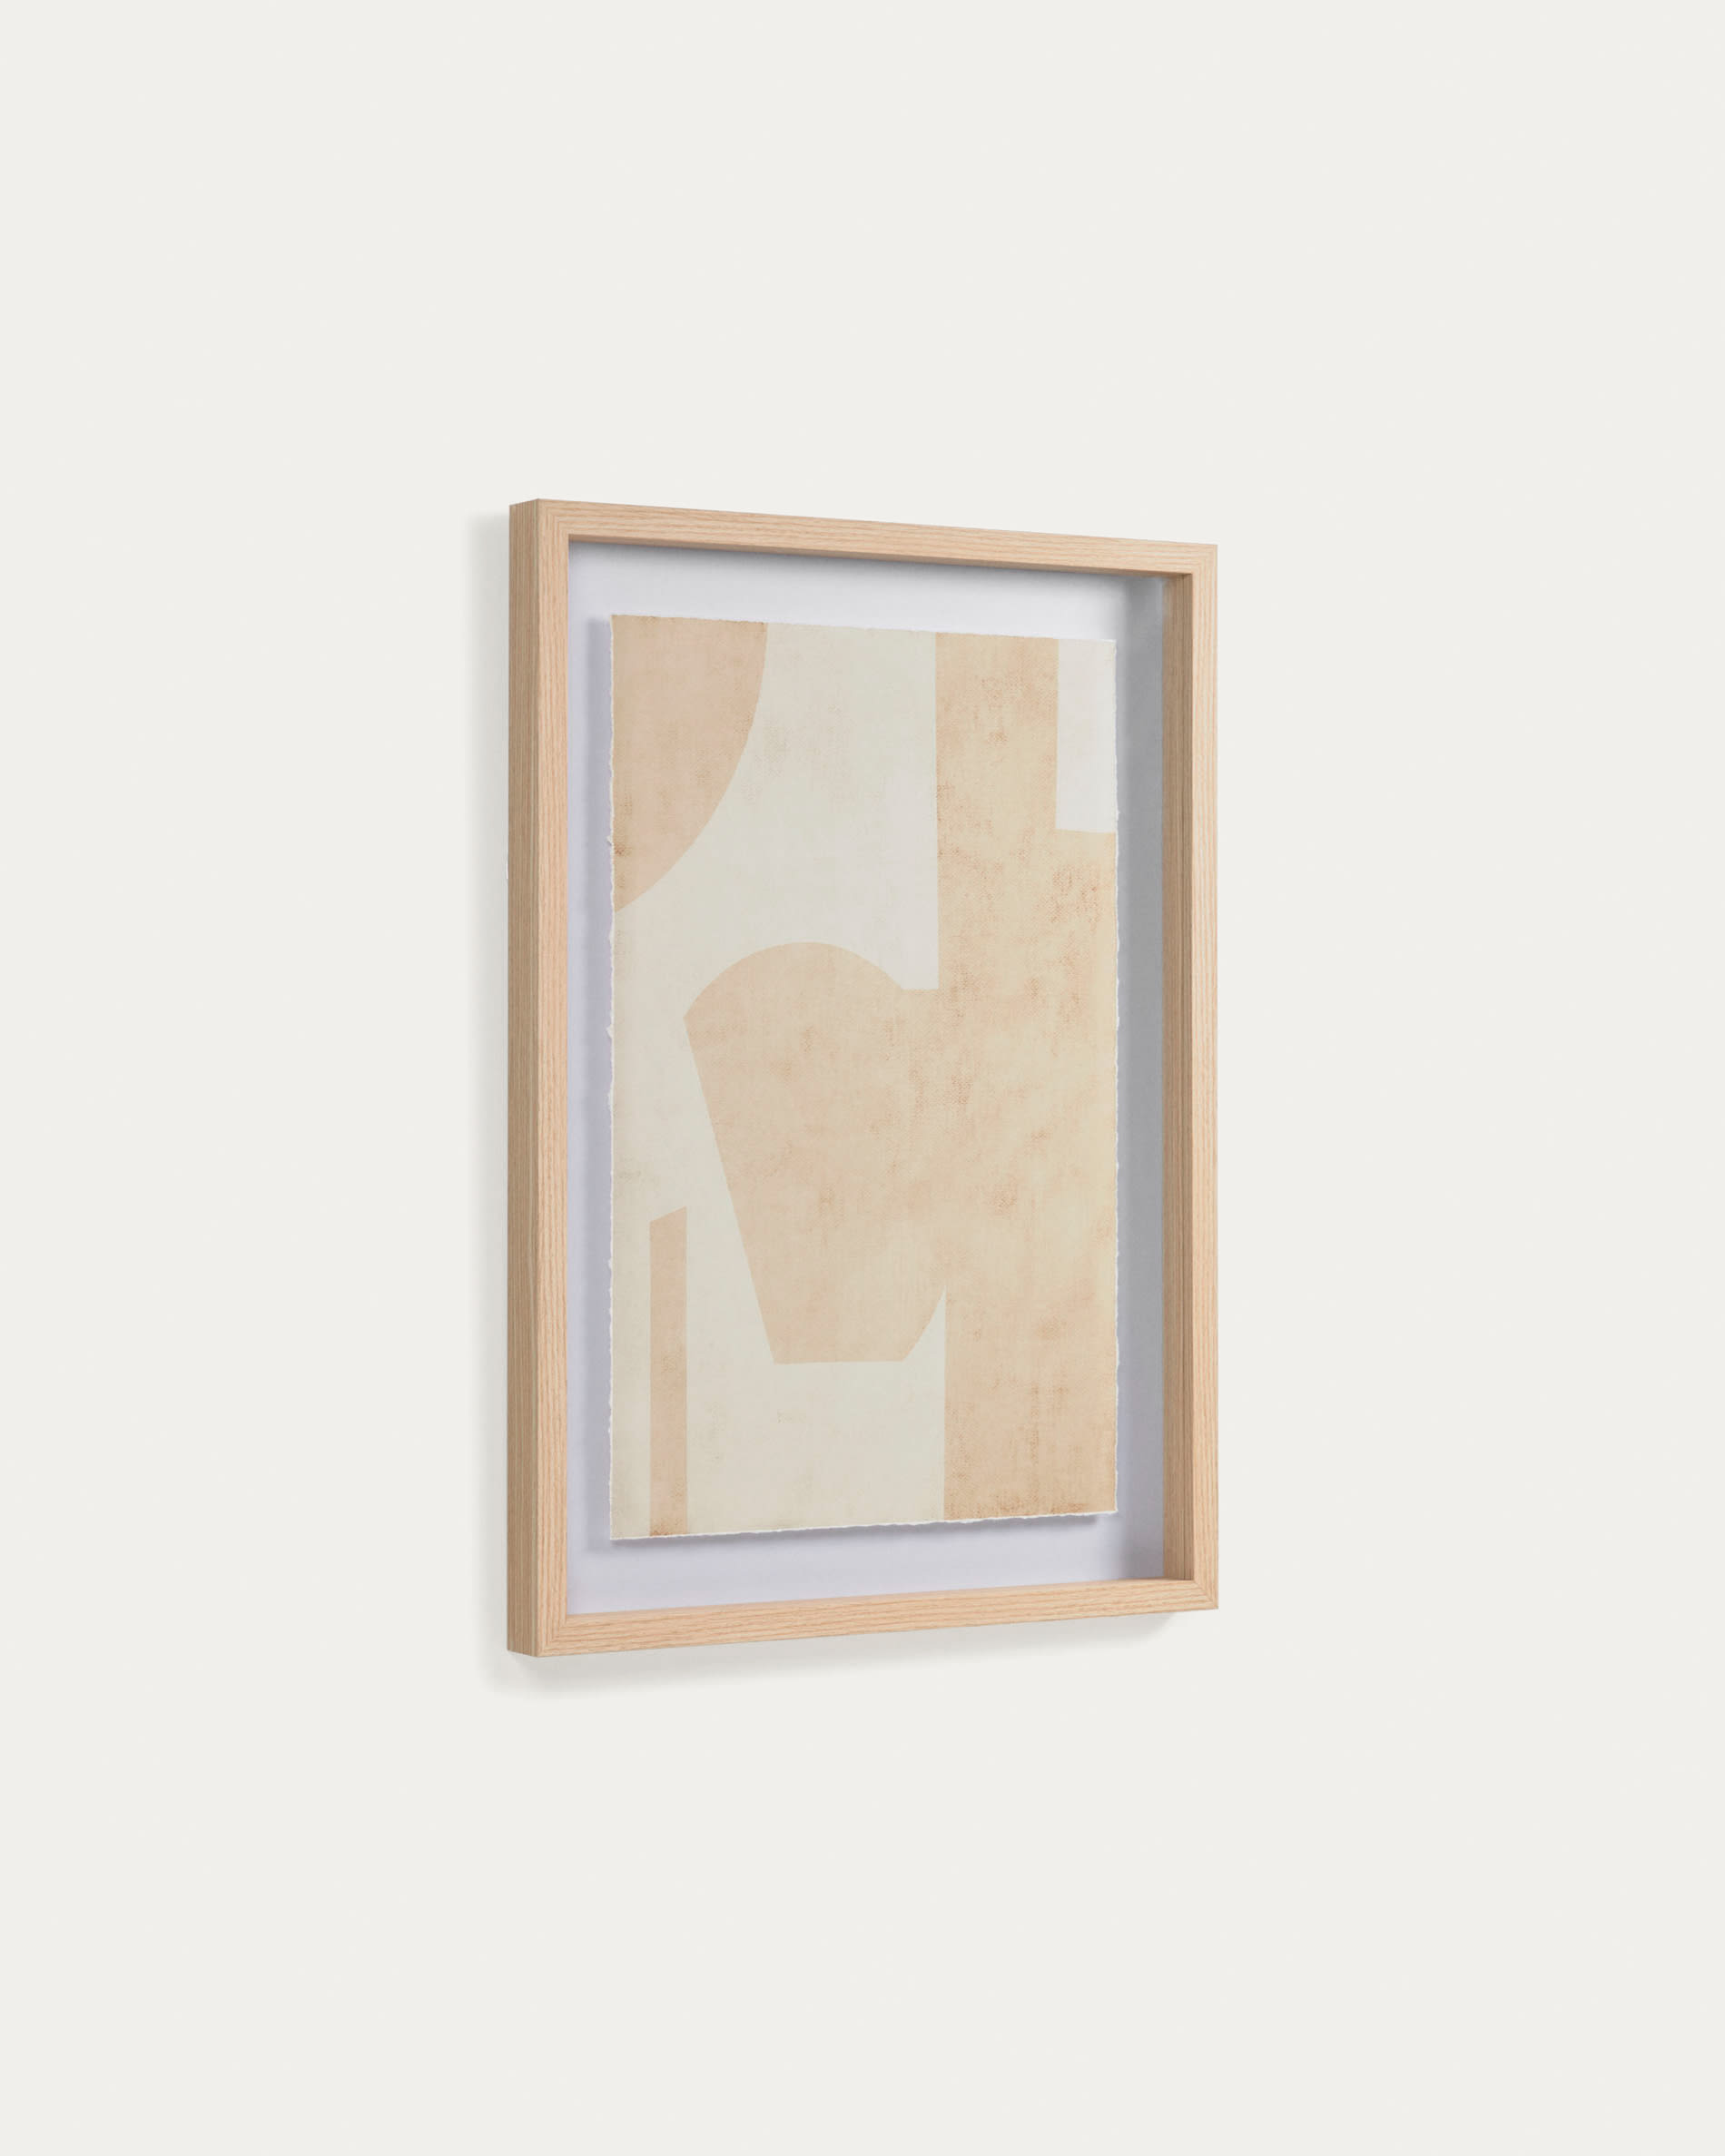 Nannete picture with geometric shapes in beige 50 x 70 cm | Kave Home